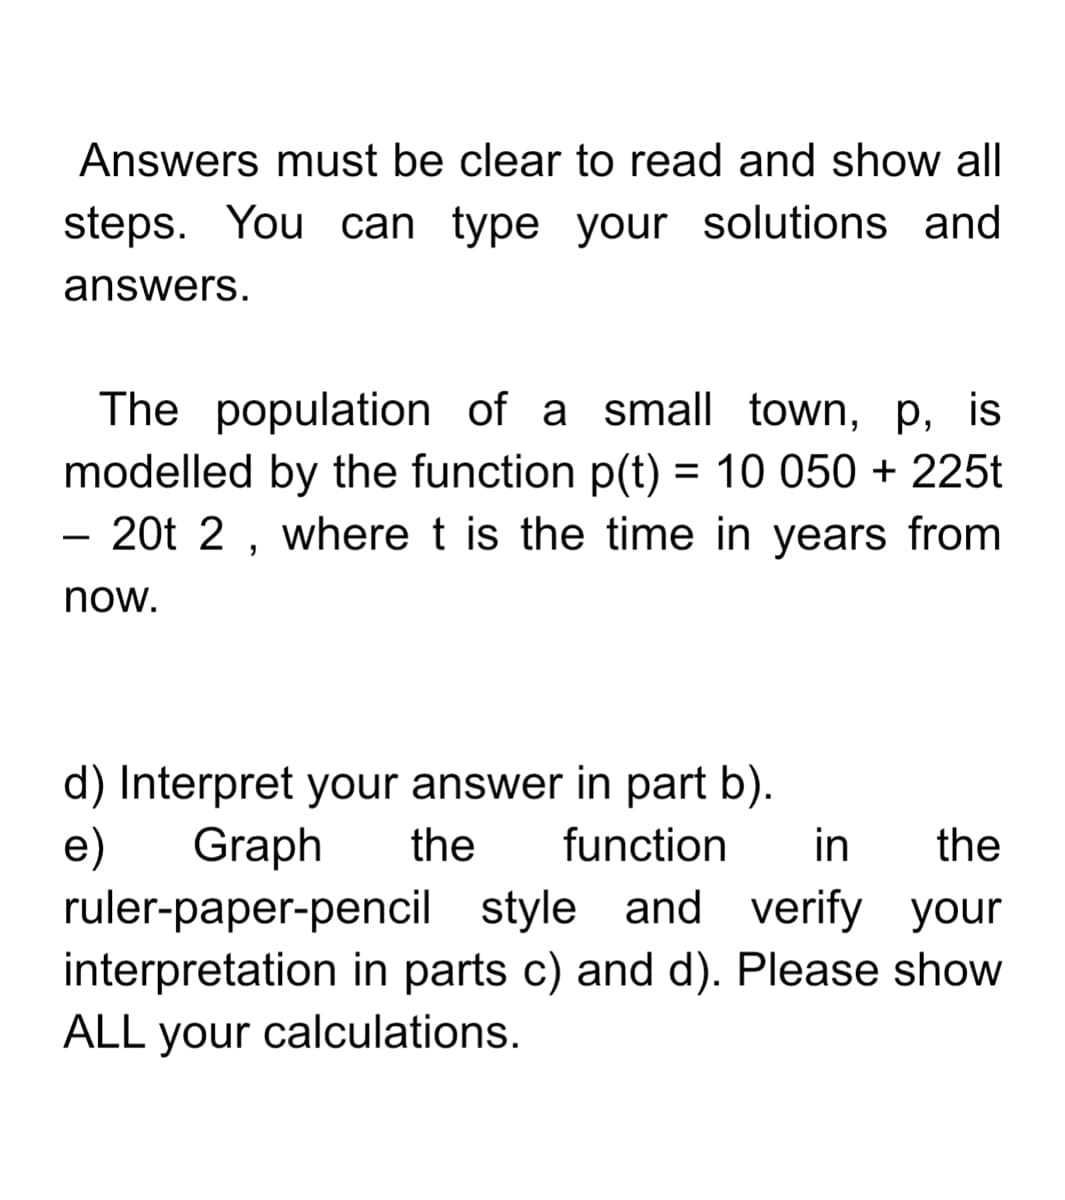 Answers must be clear to read and show all
steps. You can type your solutions and
answers.
The population of a small town, p, is
modelled by the function p(t) = 10 050 + 225t
20t 2 , where t is the time in years from
-
now.
d) Interpret your answer in part b).
e)
Graph
the
function
in
the
ruler-paper-pencil style and verify your
interpretation in parts c) and d). Please show
ALL your calculations.
